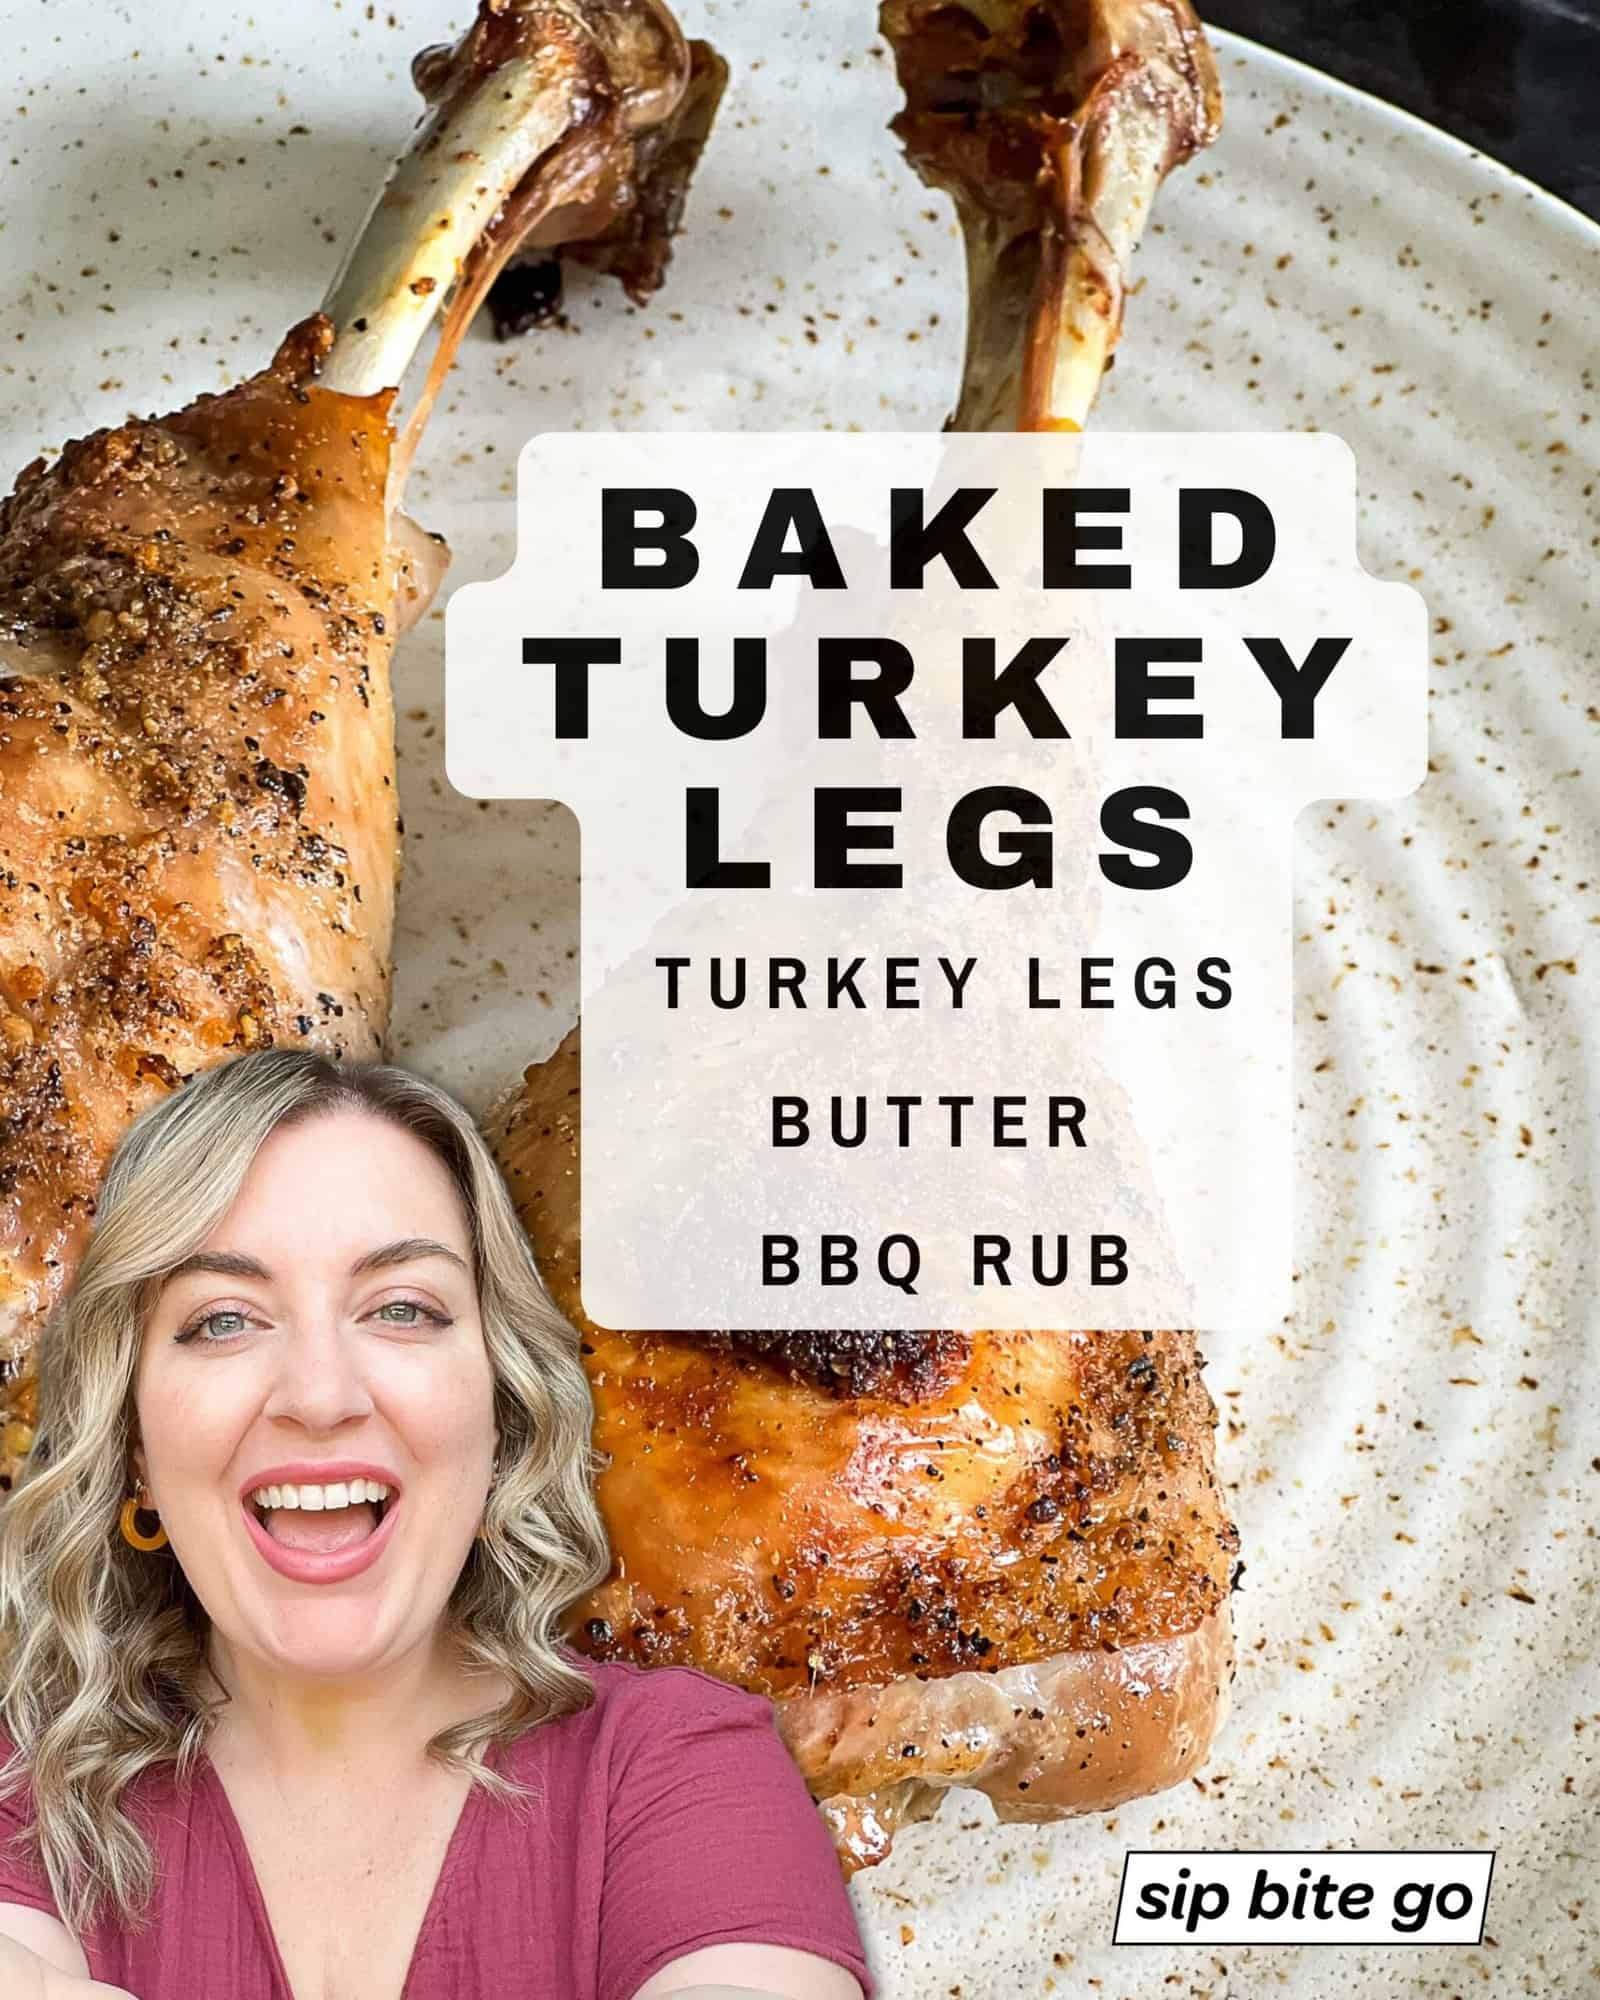 Ingredients list for baking turkey legs in oven with Jenna Passaro food blogger and Sip Bite Go logo